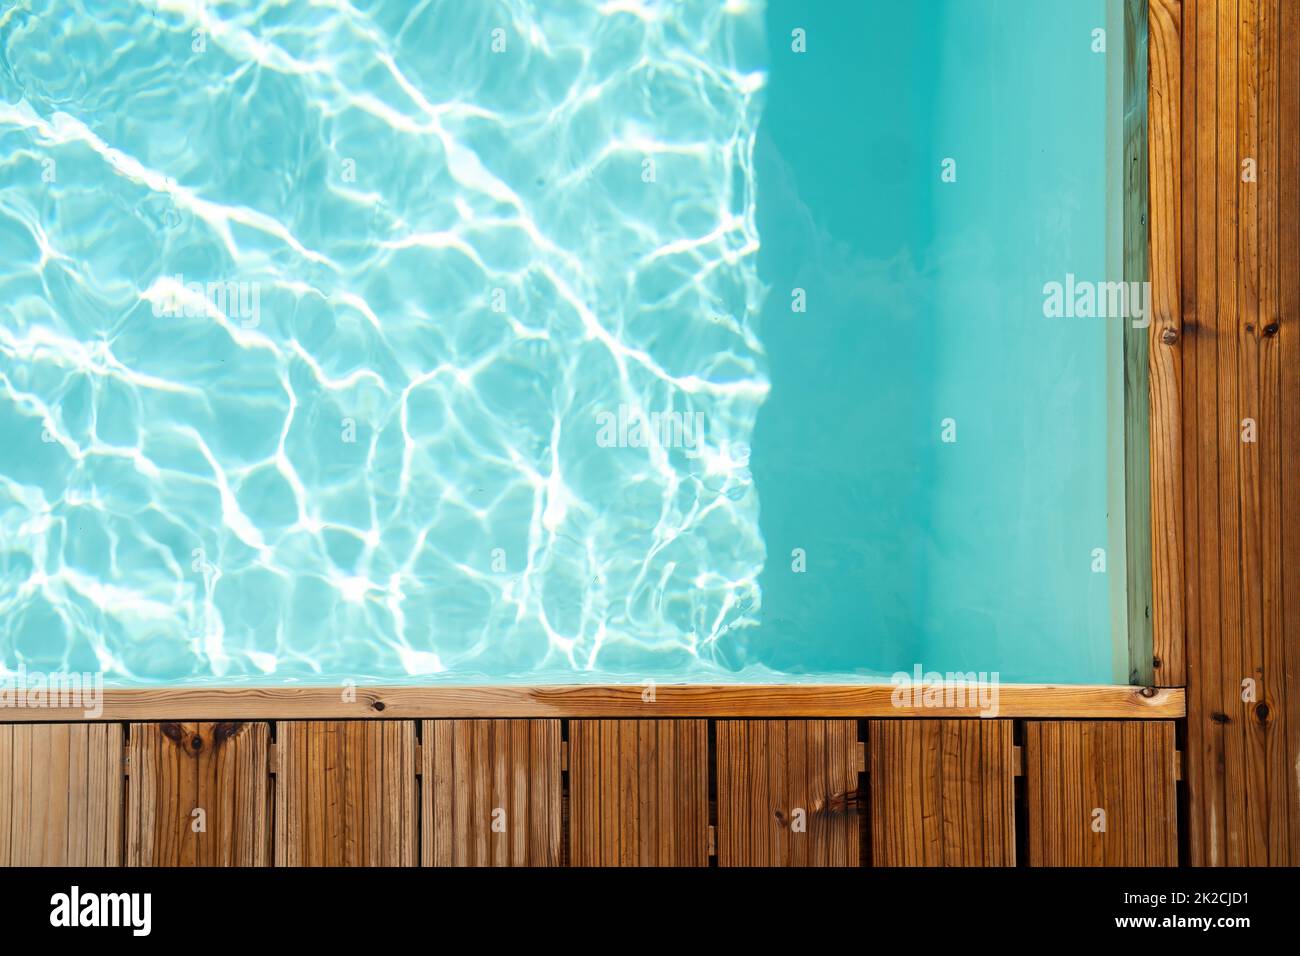 Background with wooden board on swimming pool Stock Photo